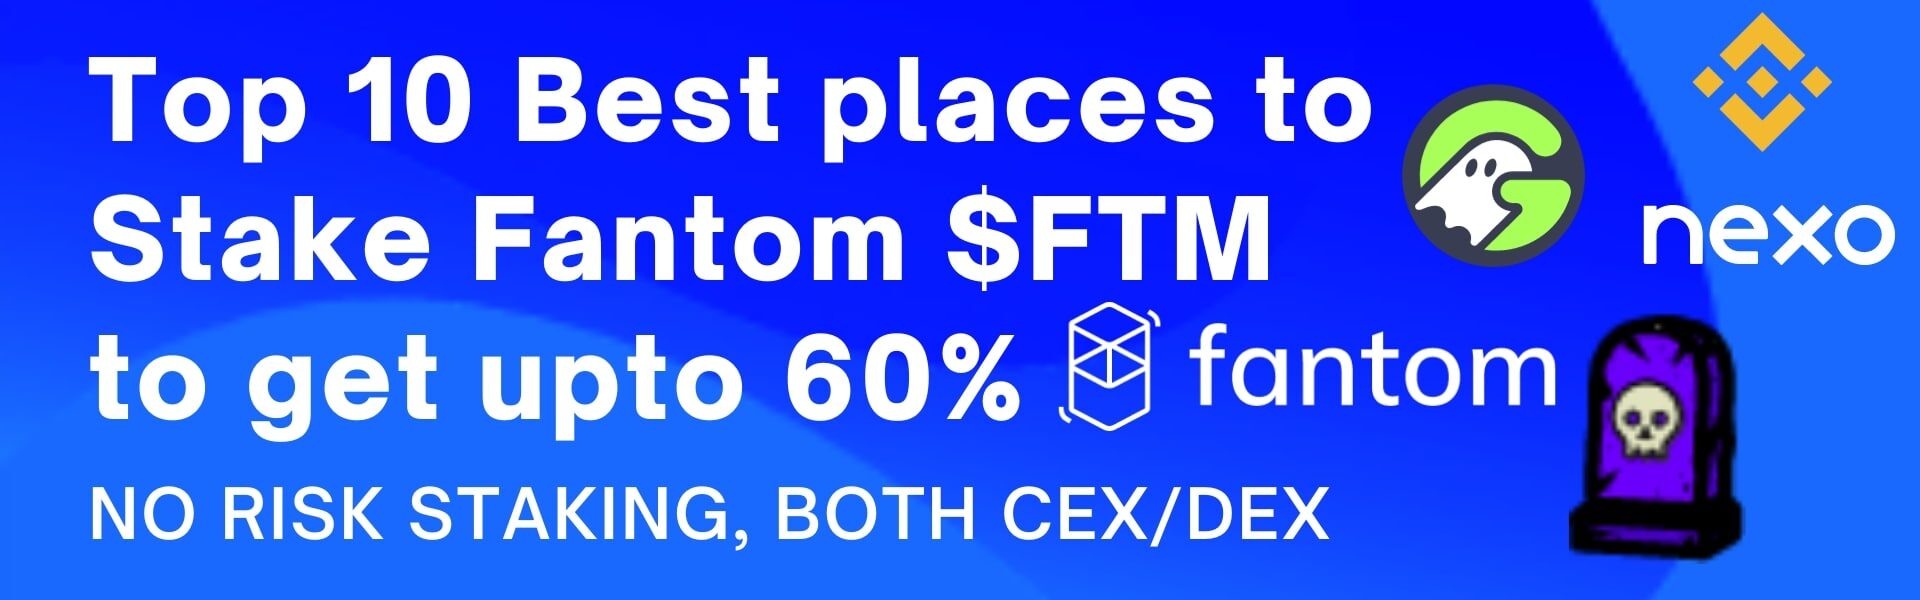 Best place to stake Fantom FTM token and get highest interest